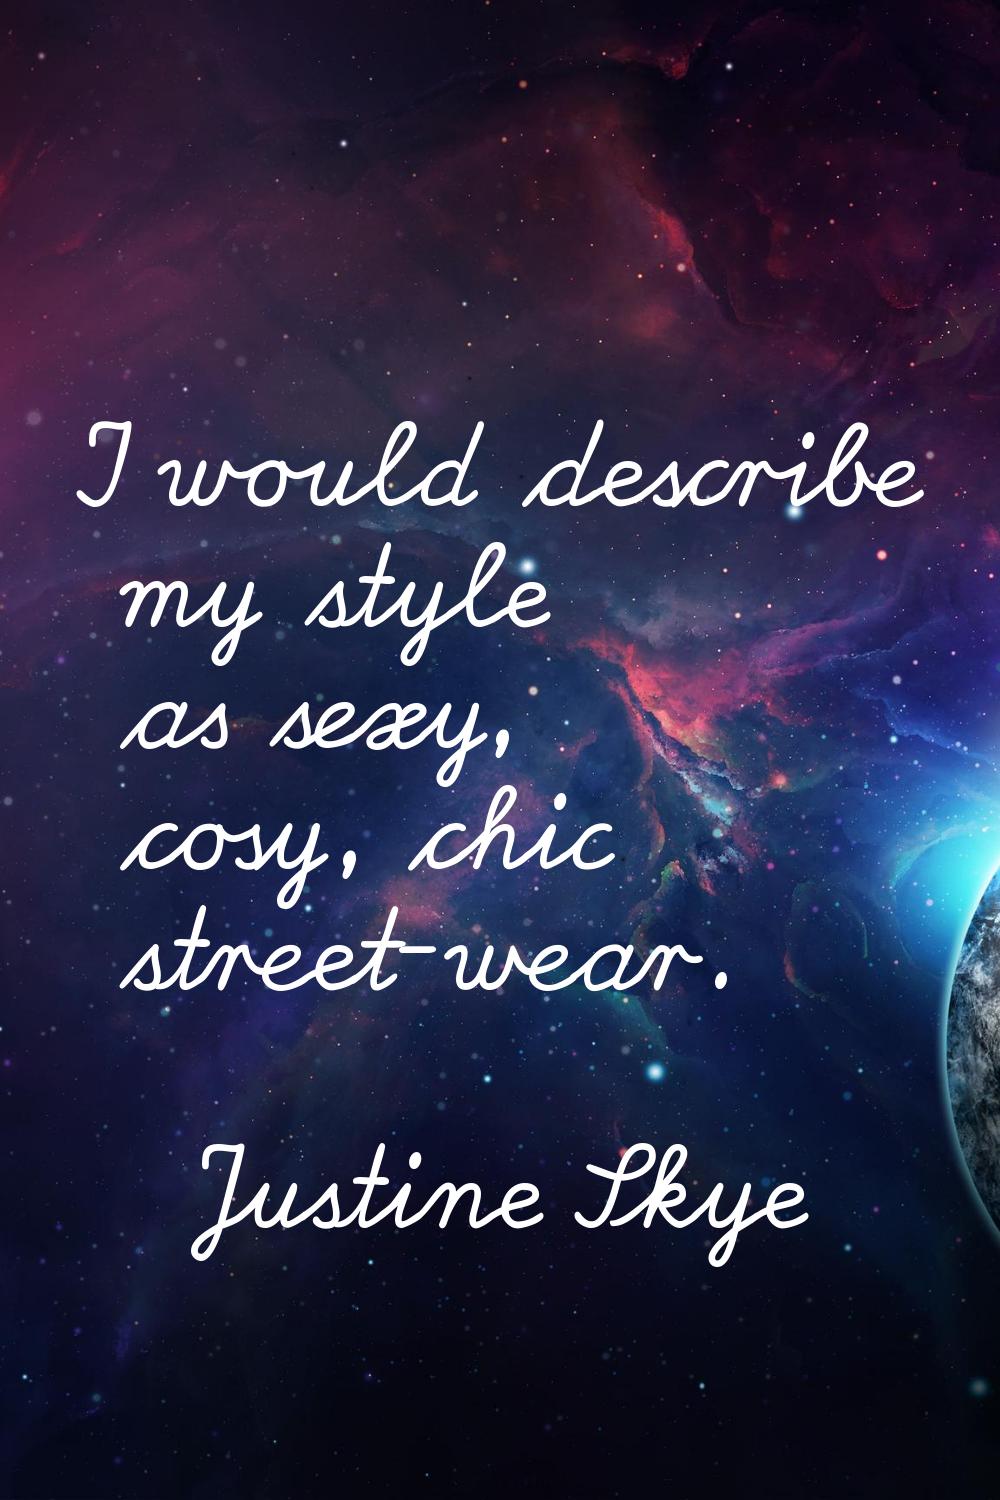 I would describe my style as sexy, cosy, chic street-wear.